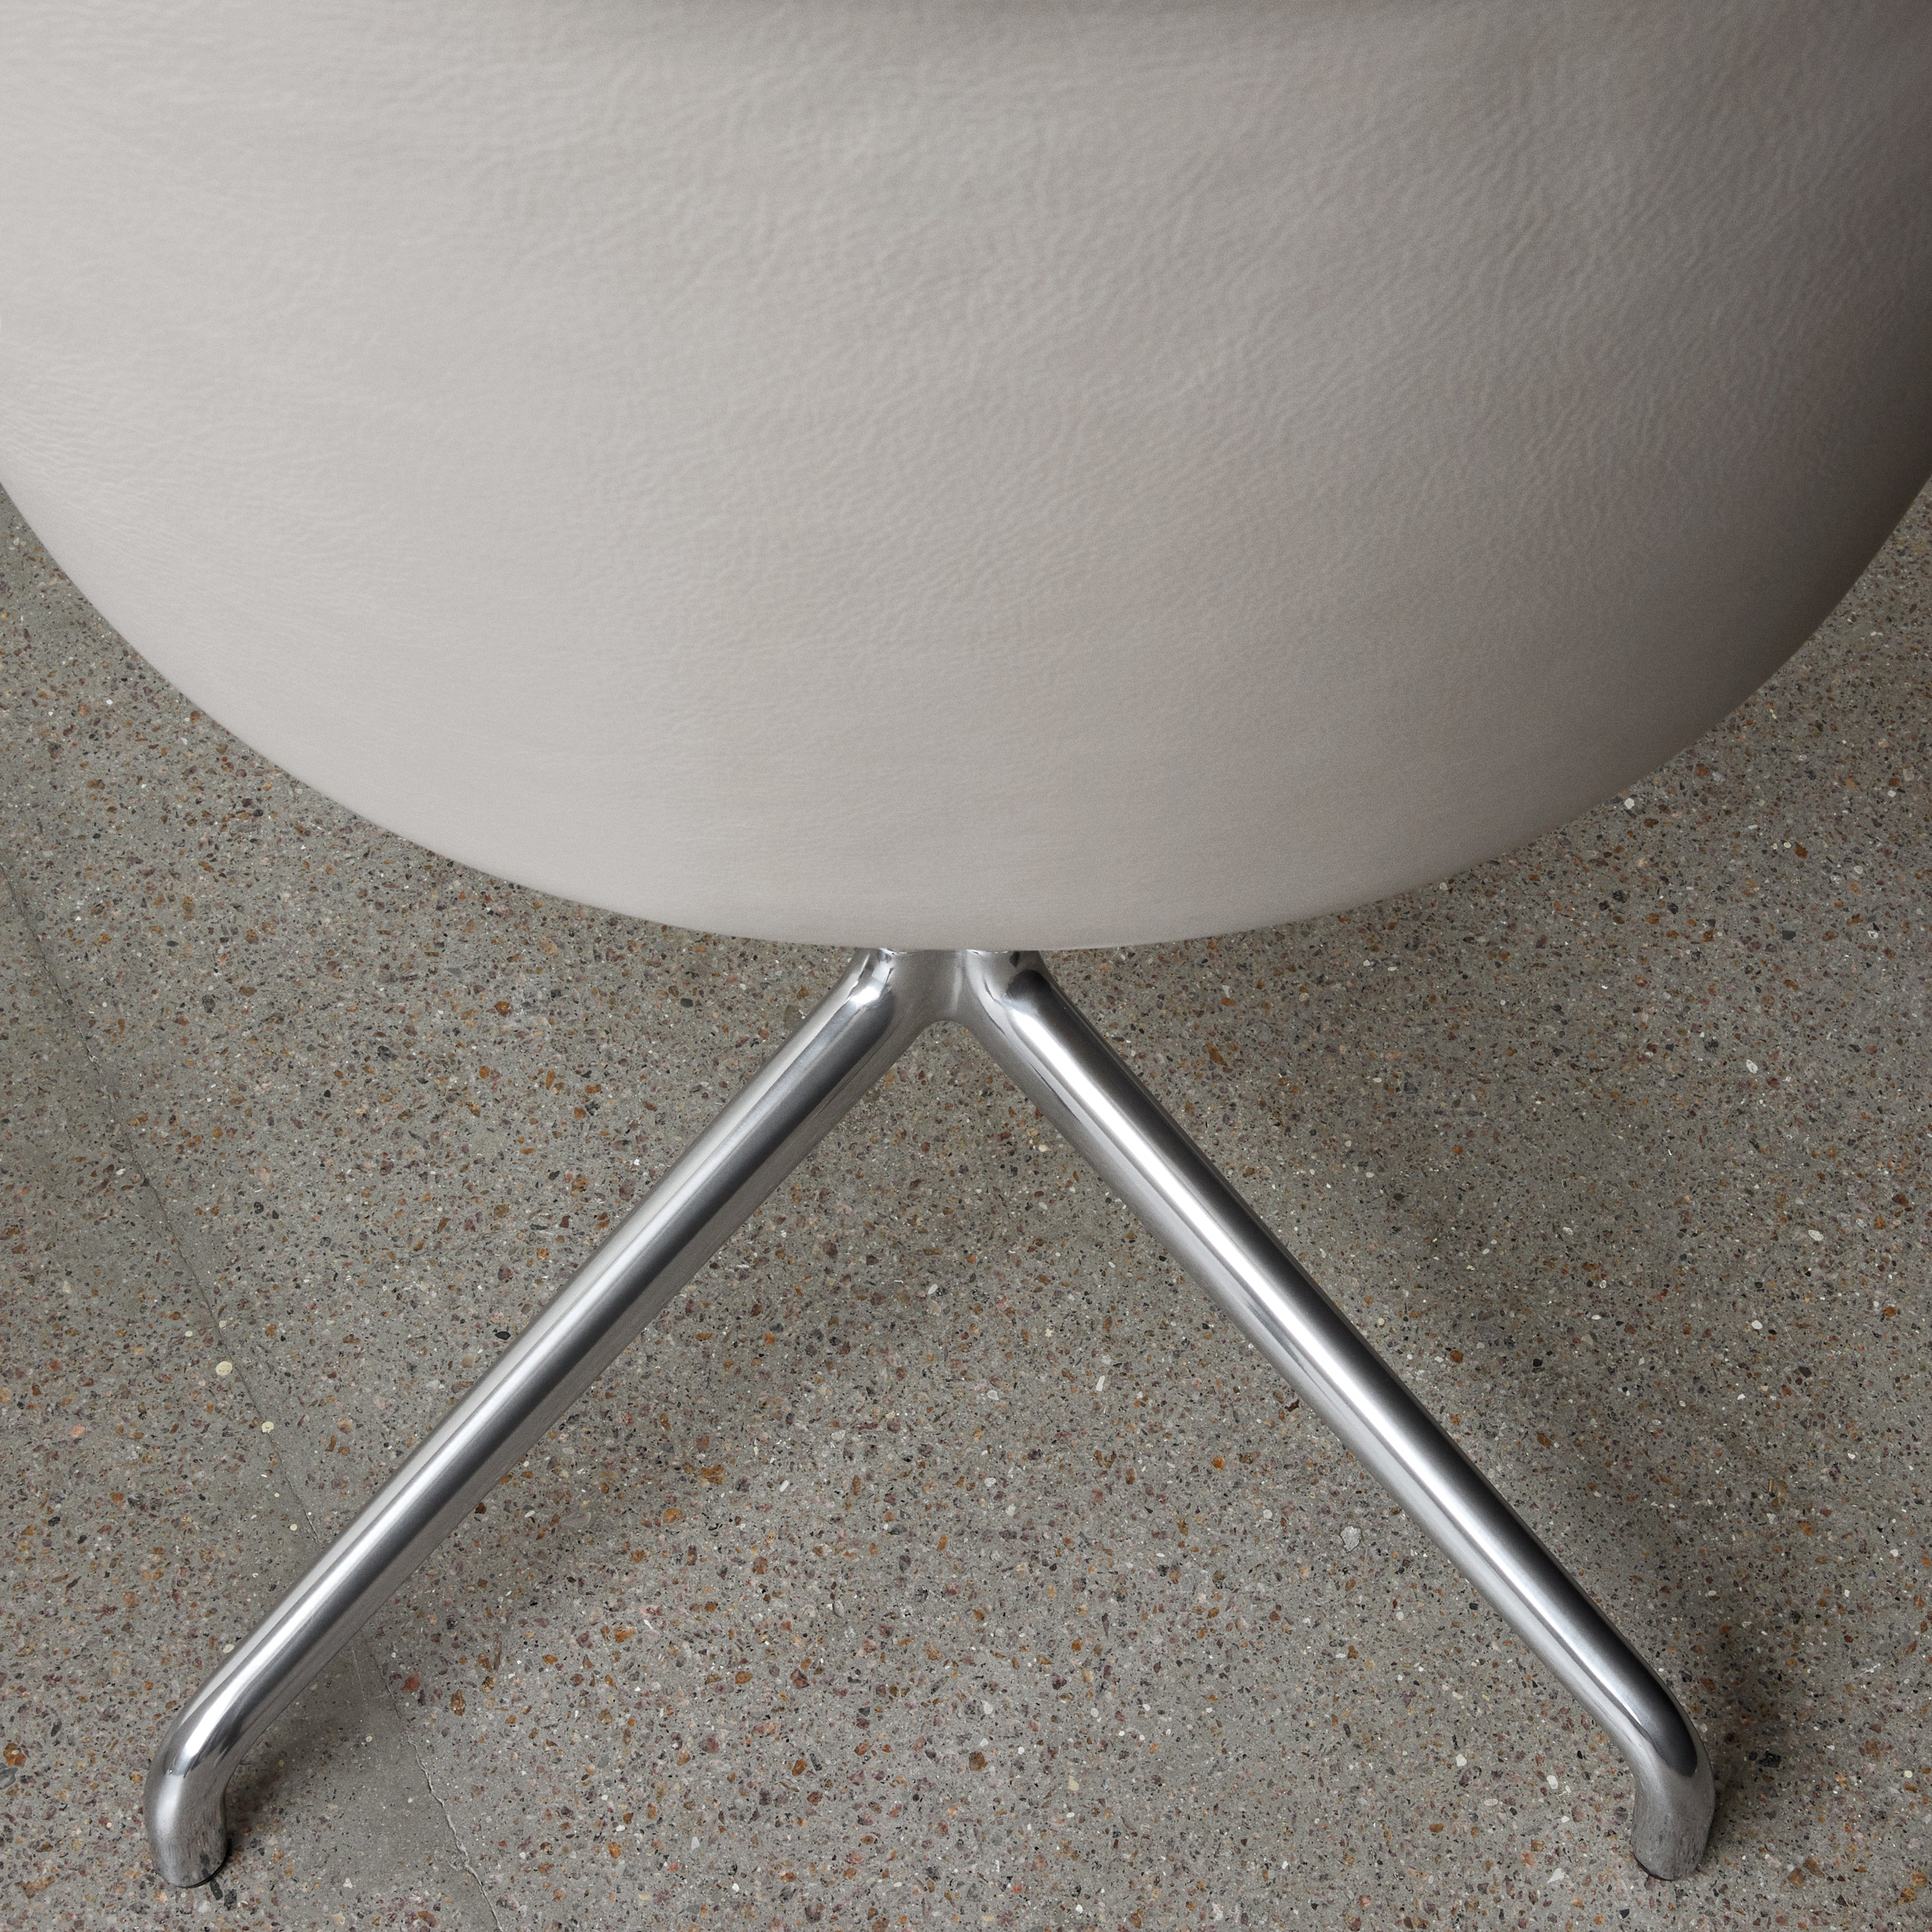 Harbour Dining Chair Star Base: Upholstered